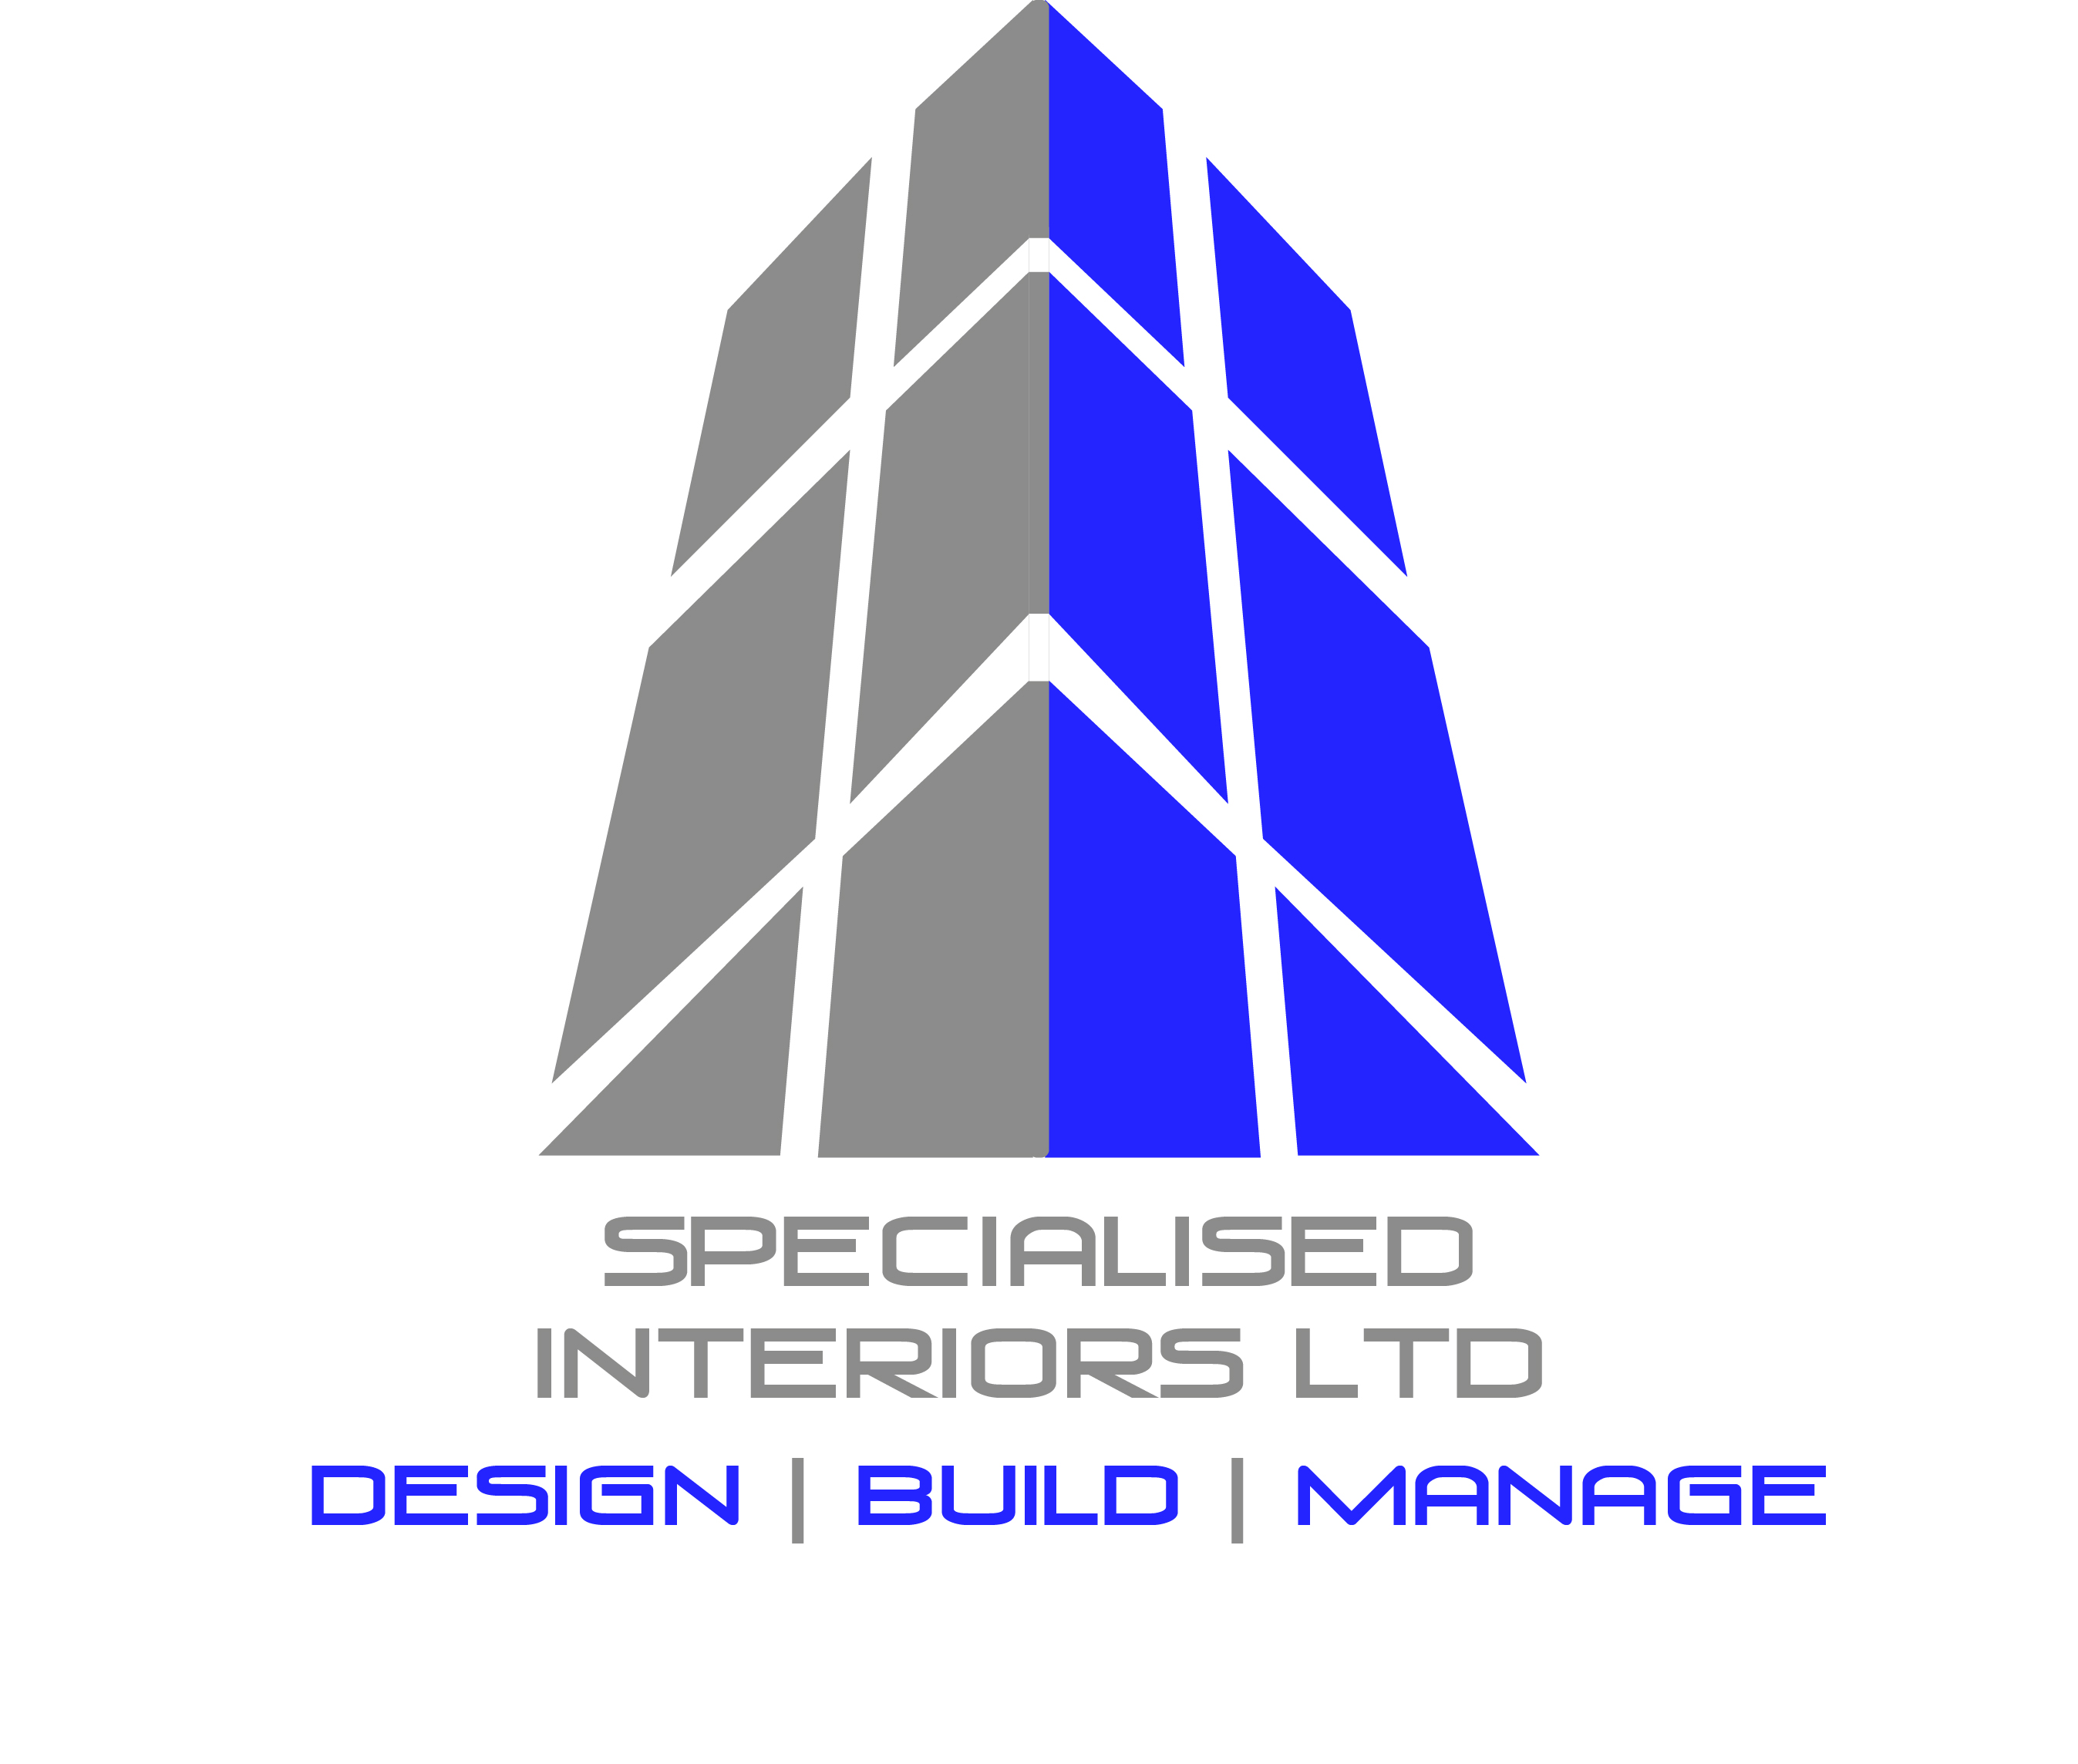 Logo of Specialised interiors limited Office Refurbishment Services In Horsham, West Sussex